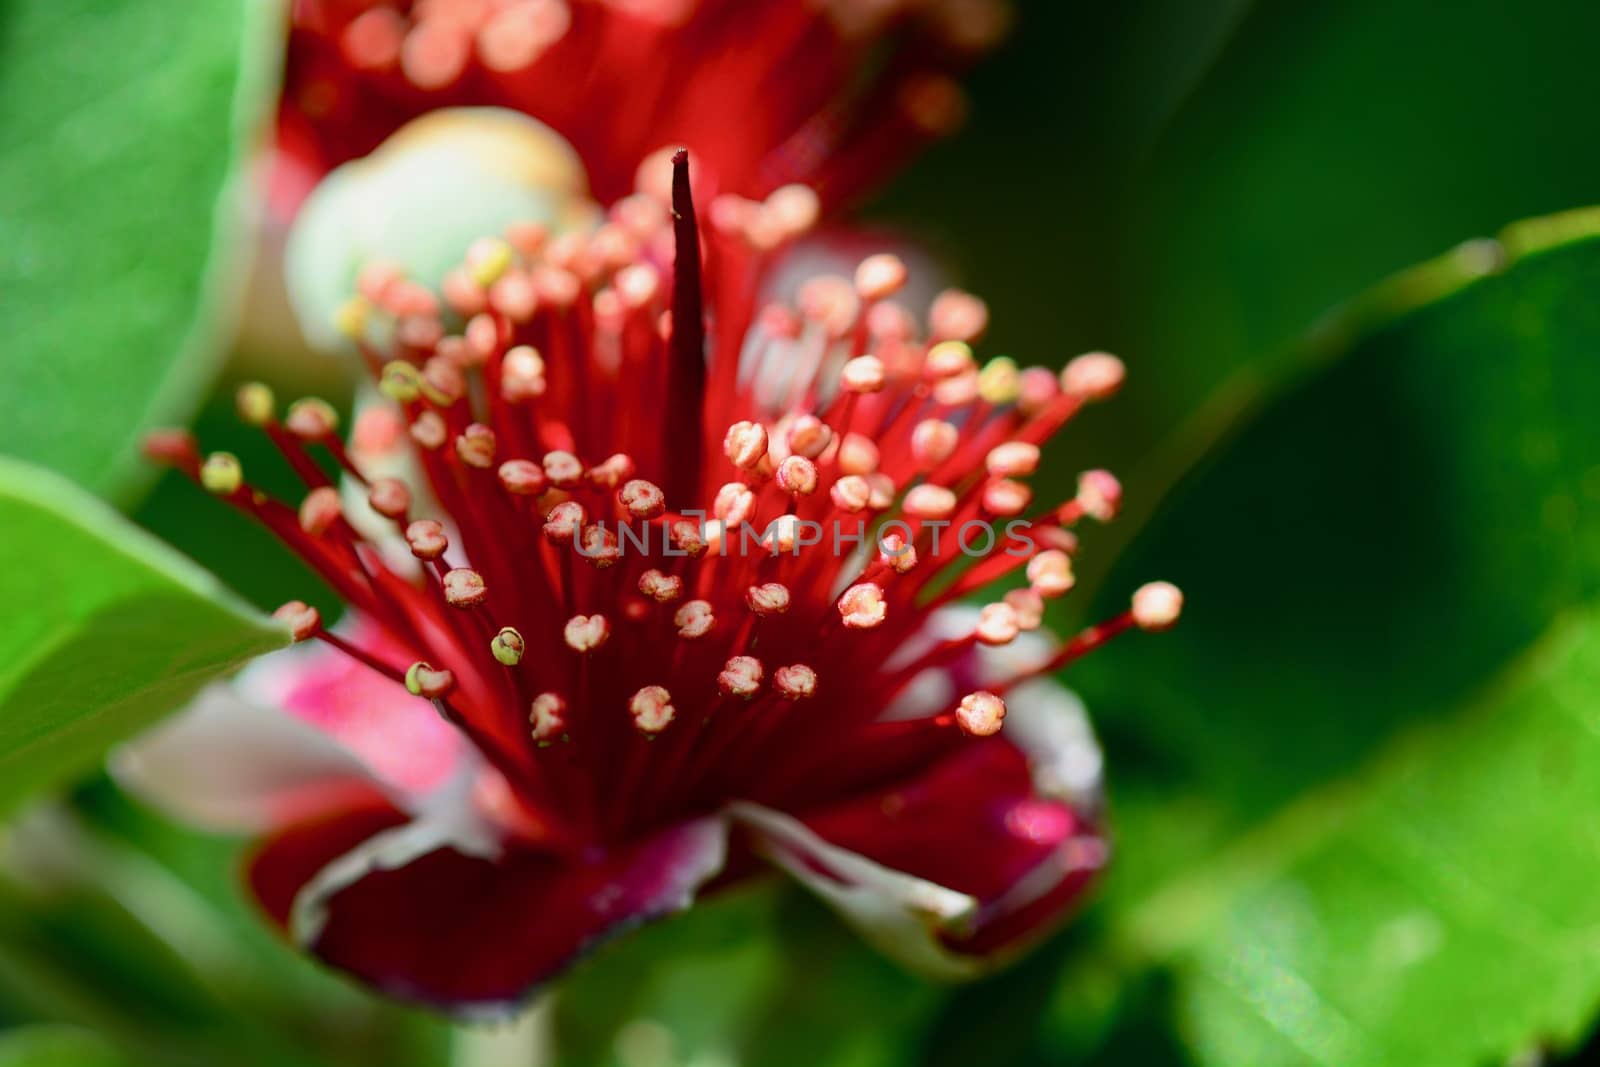 Close-up photo of feijoa flowers, selective focus. Feijoa (Acca sellowiana) is a species of flowering plant in the myrtle family, native to the highlands of southern Brazil. Pollinated by birds. by Marshalkina